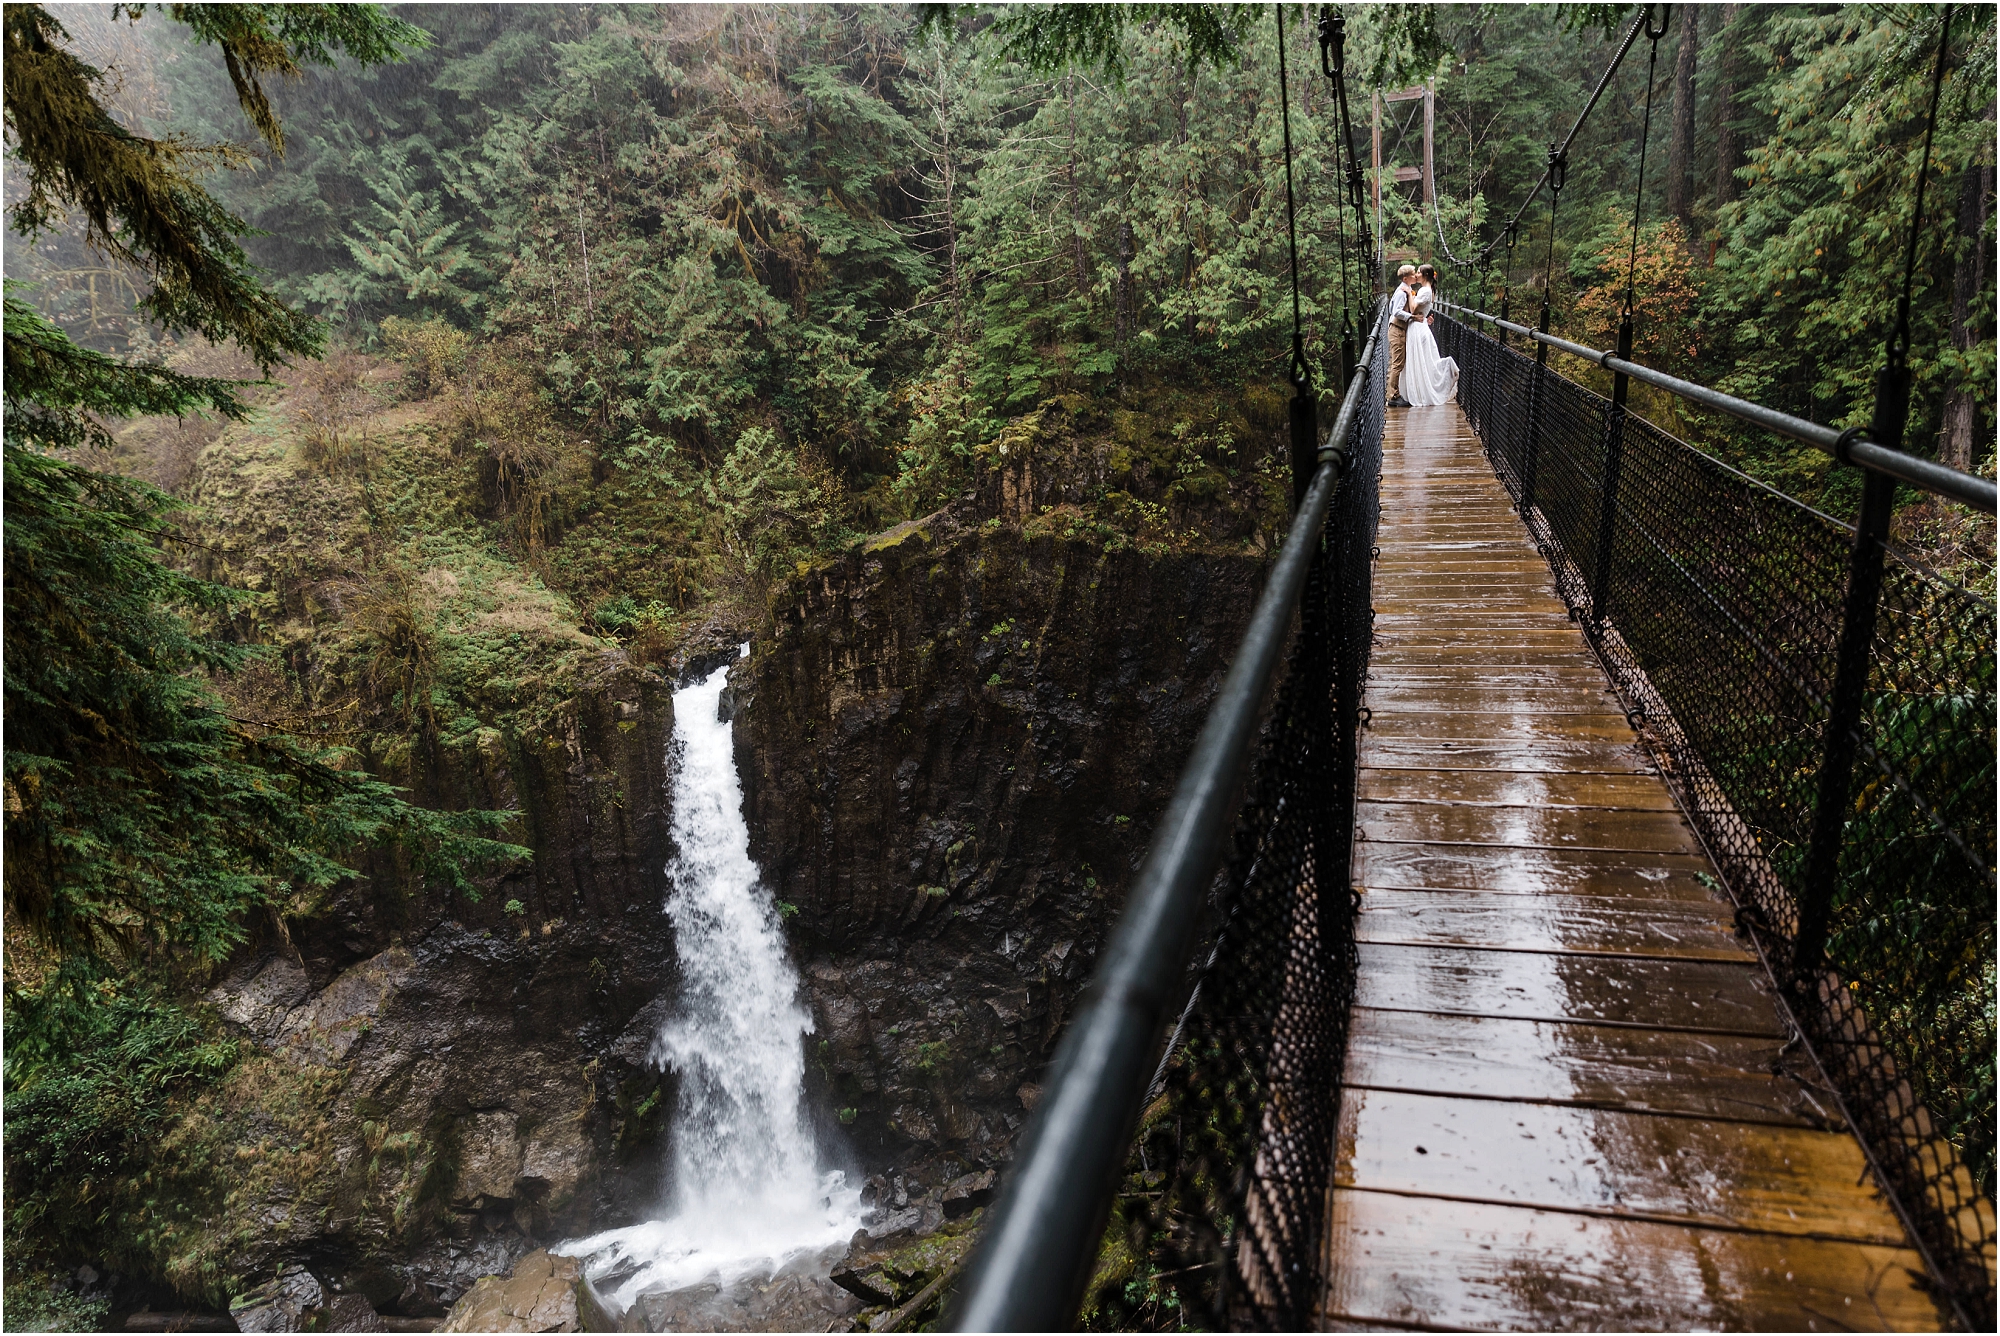 A stunning landscape of a wedding couple standing on the suspension bridge over Drift Creek falls snuggling under their wool blanket as the rain pours down on them during their PNW hiking adventure elopement. | Erica Swantek Photography